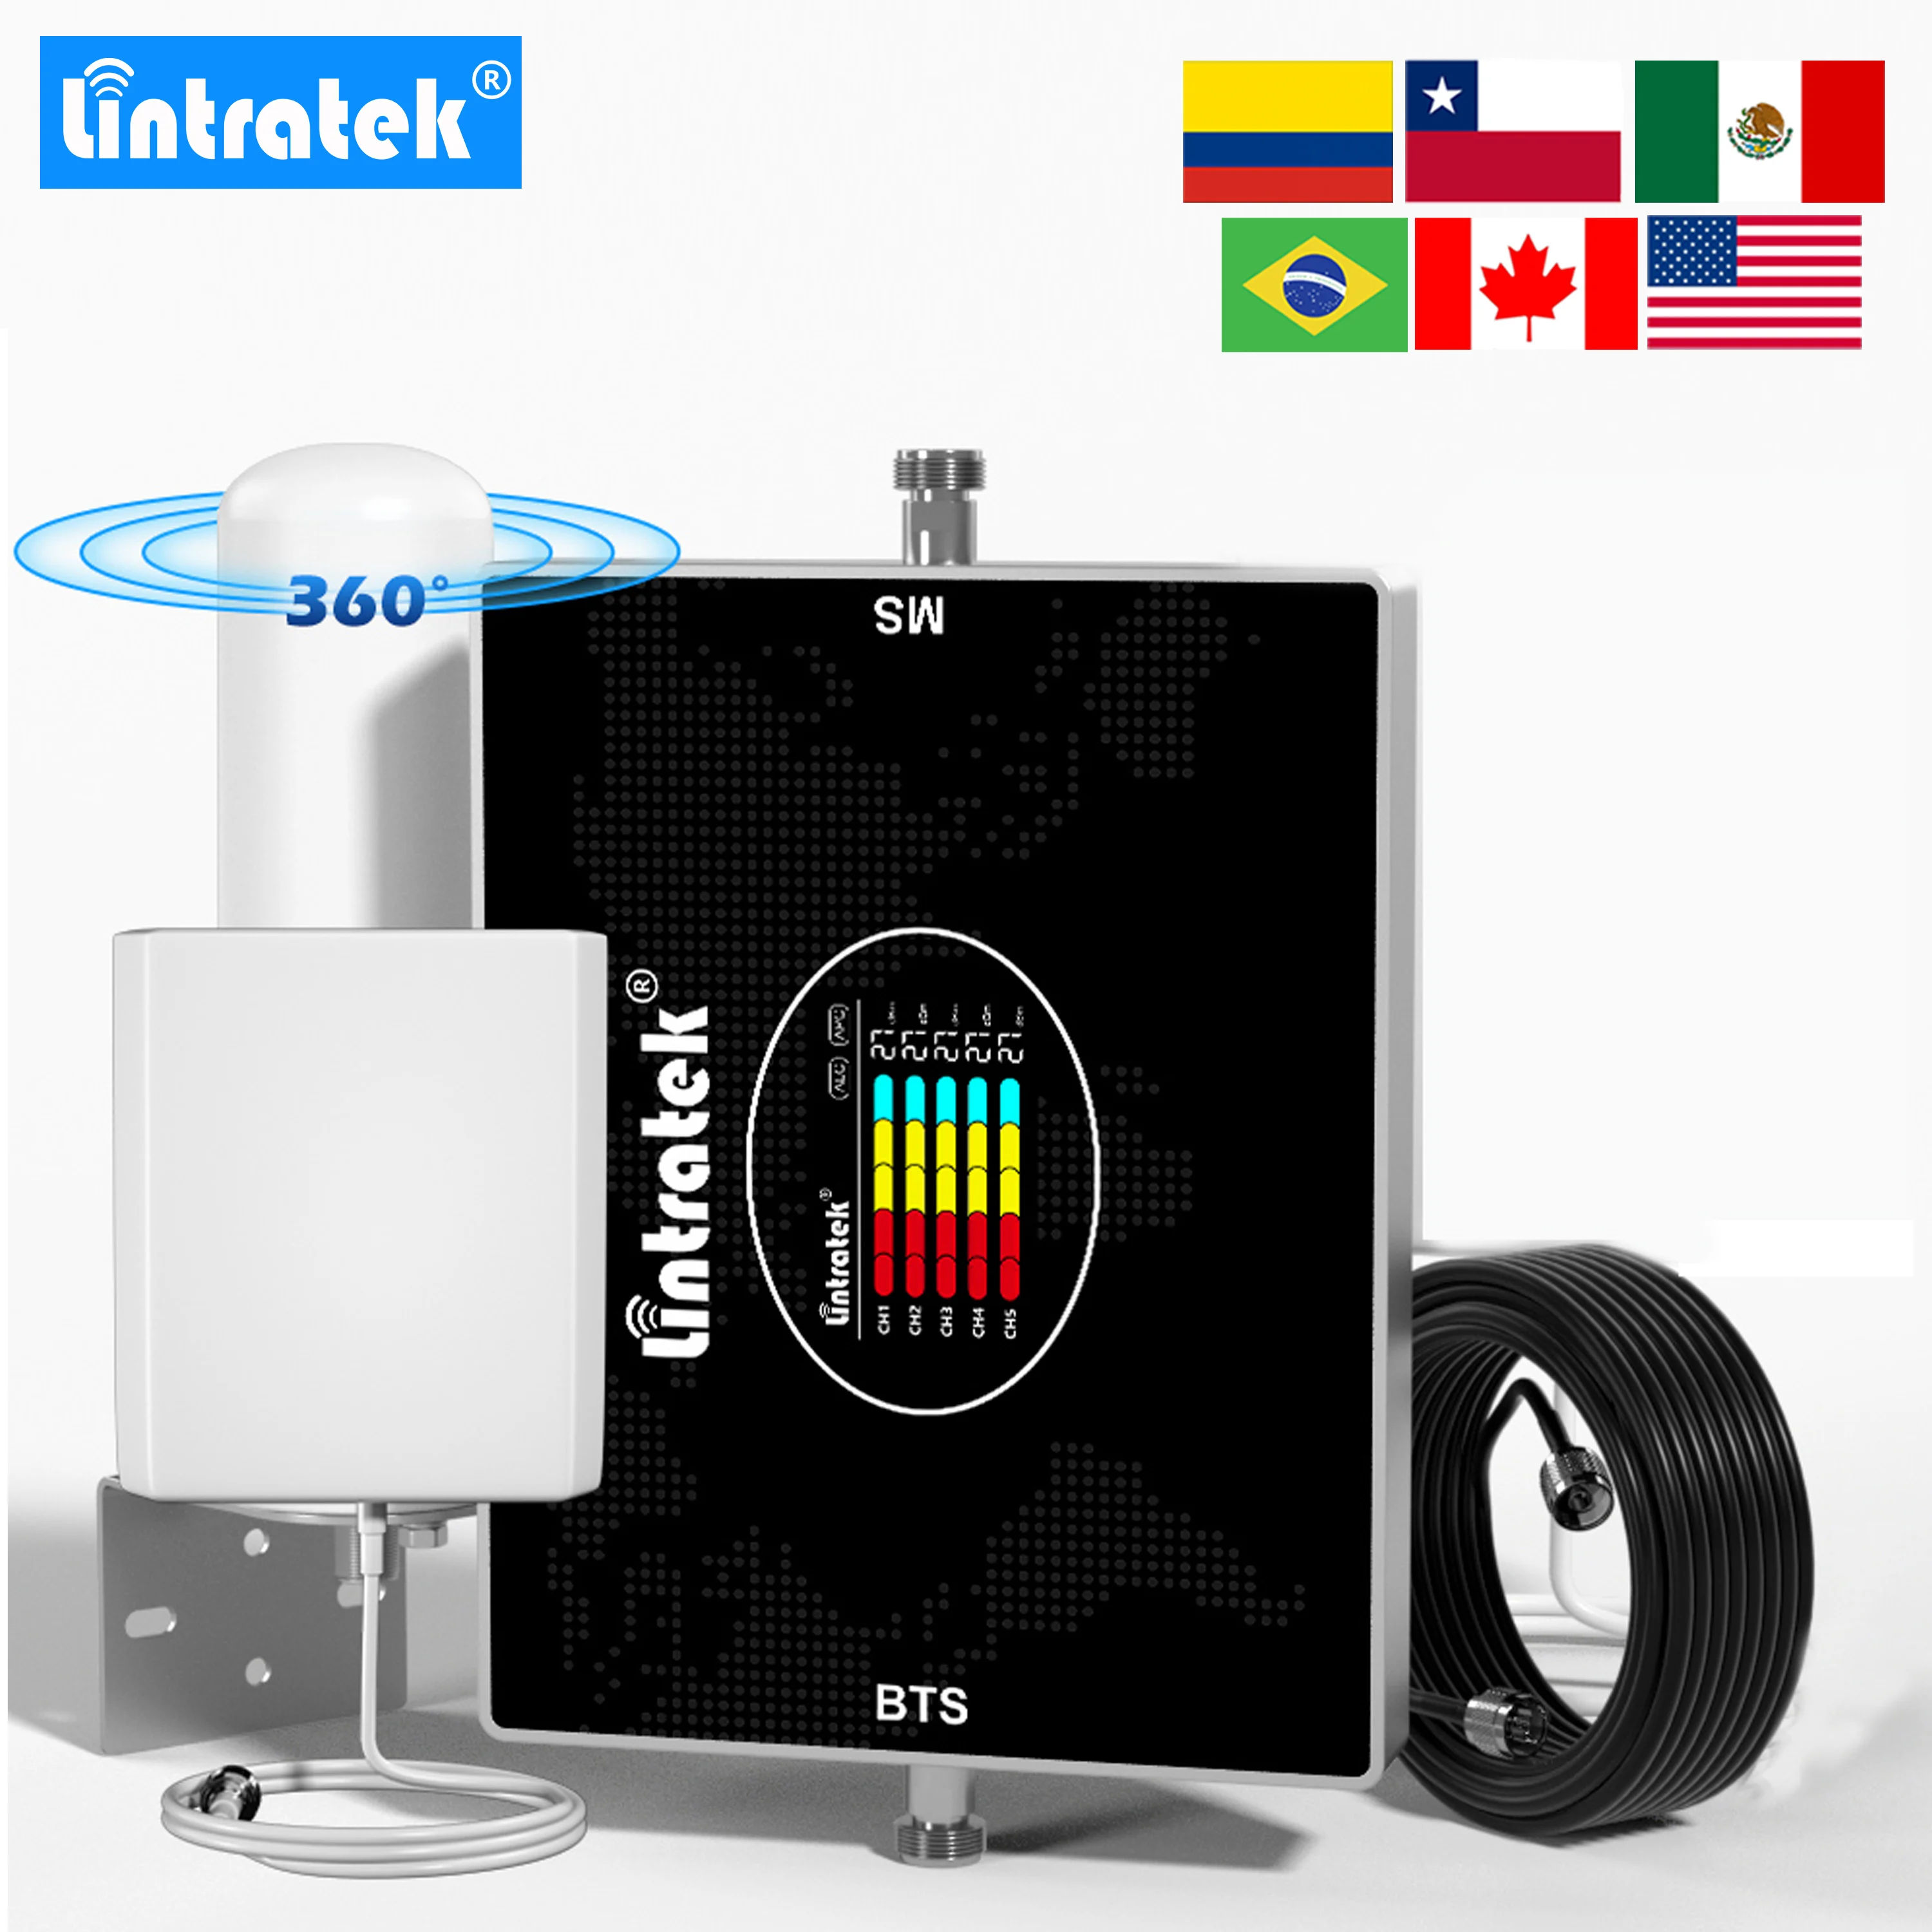 Lintratek Five Band Signal Booster Cellular Amplifier Repeater 850 700 1700 1900 2100B13 B12 B1 B5 B4 B2 For Chile Brazil Mexico